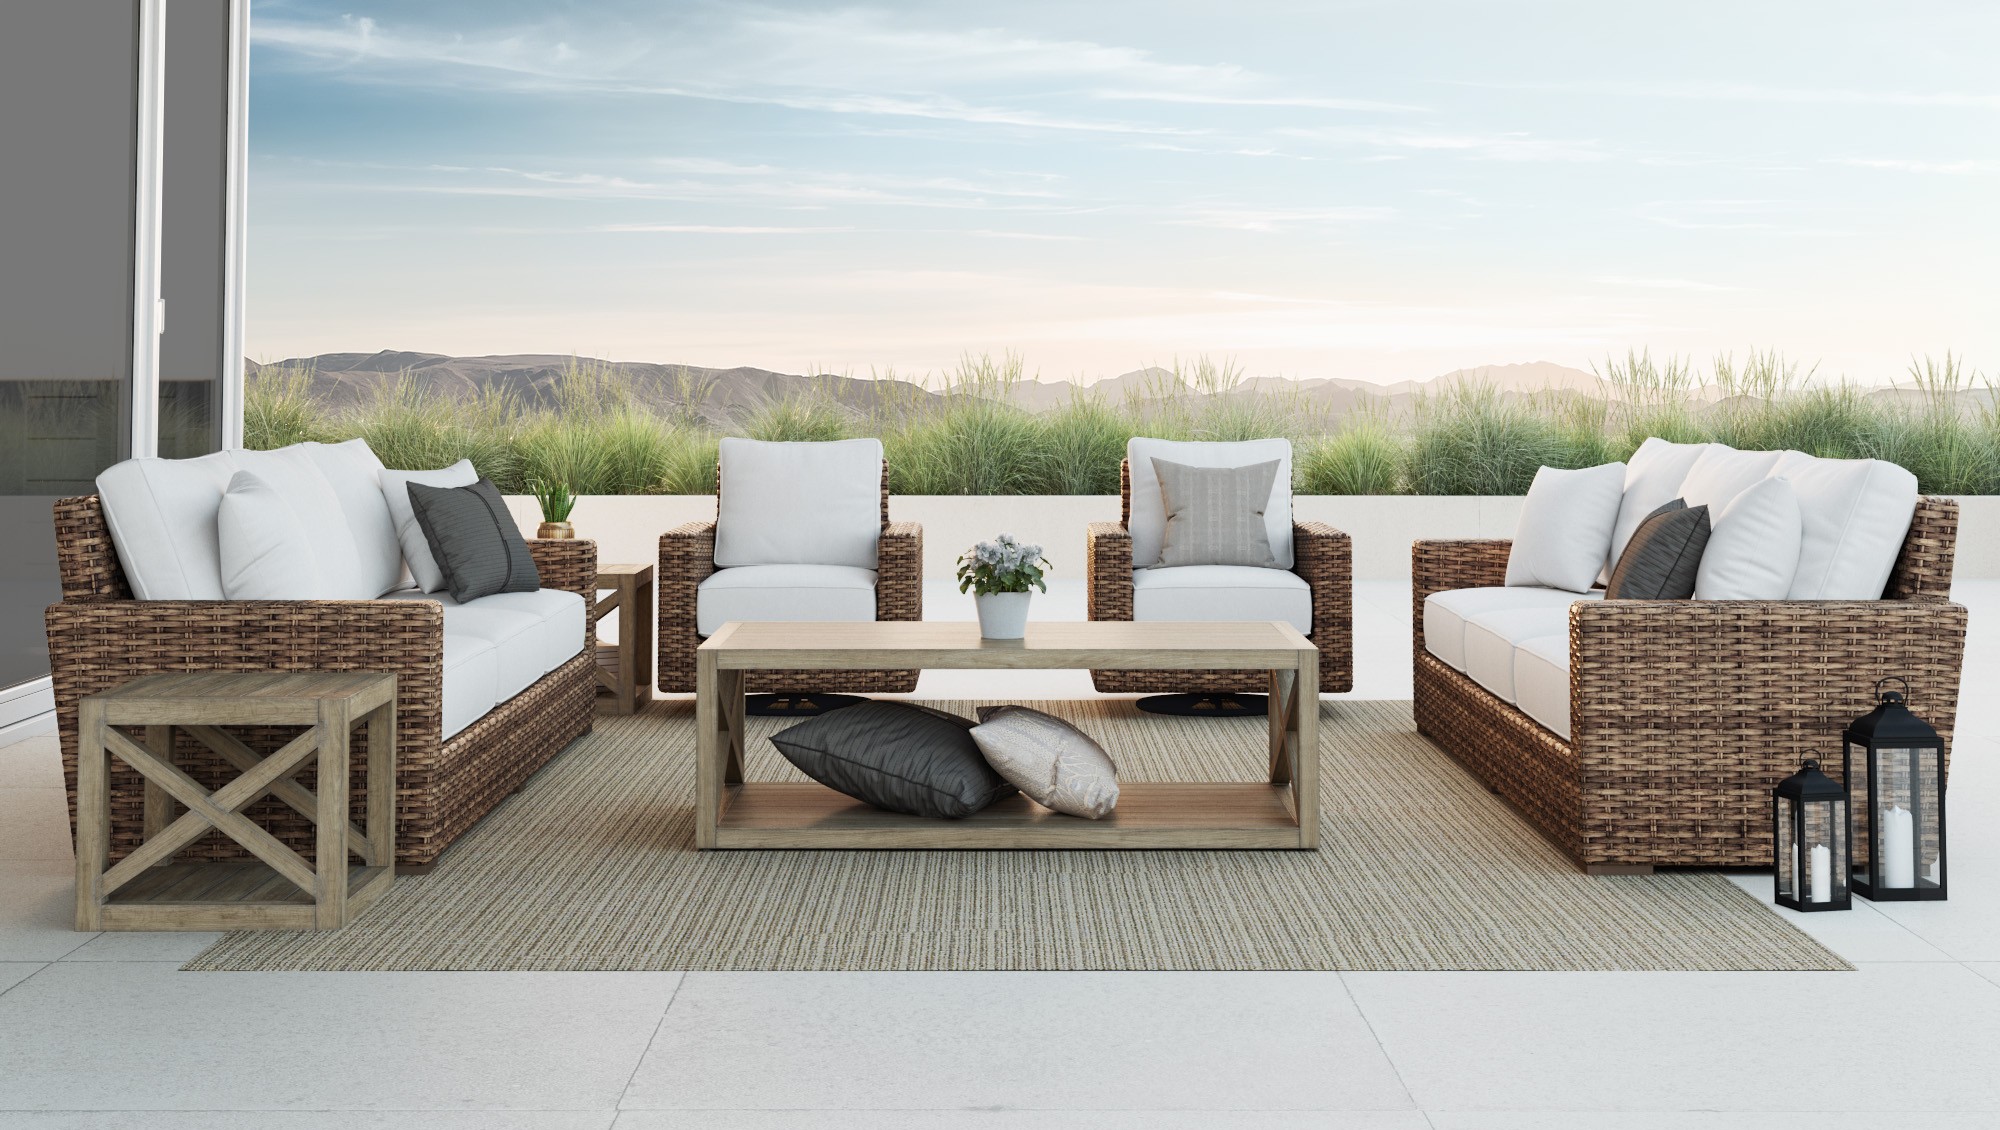 Sunset West Outdoor Furnishings Linkedin, Sunset West Patio Chairs